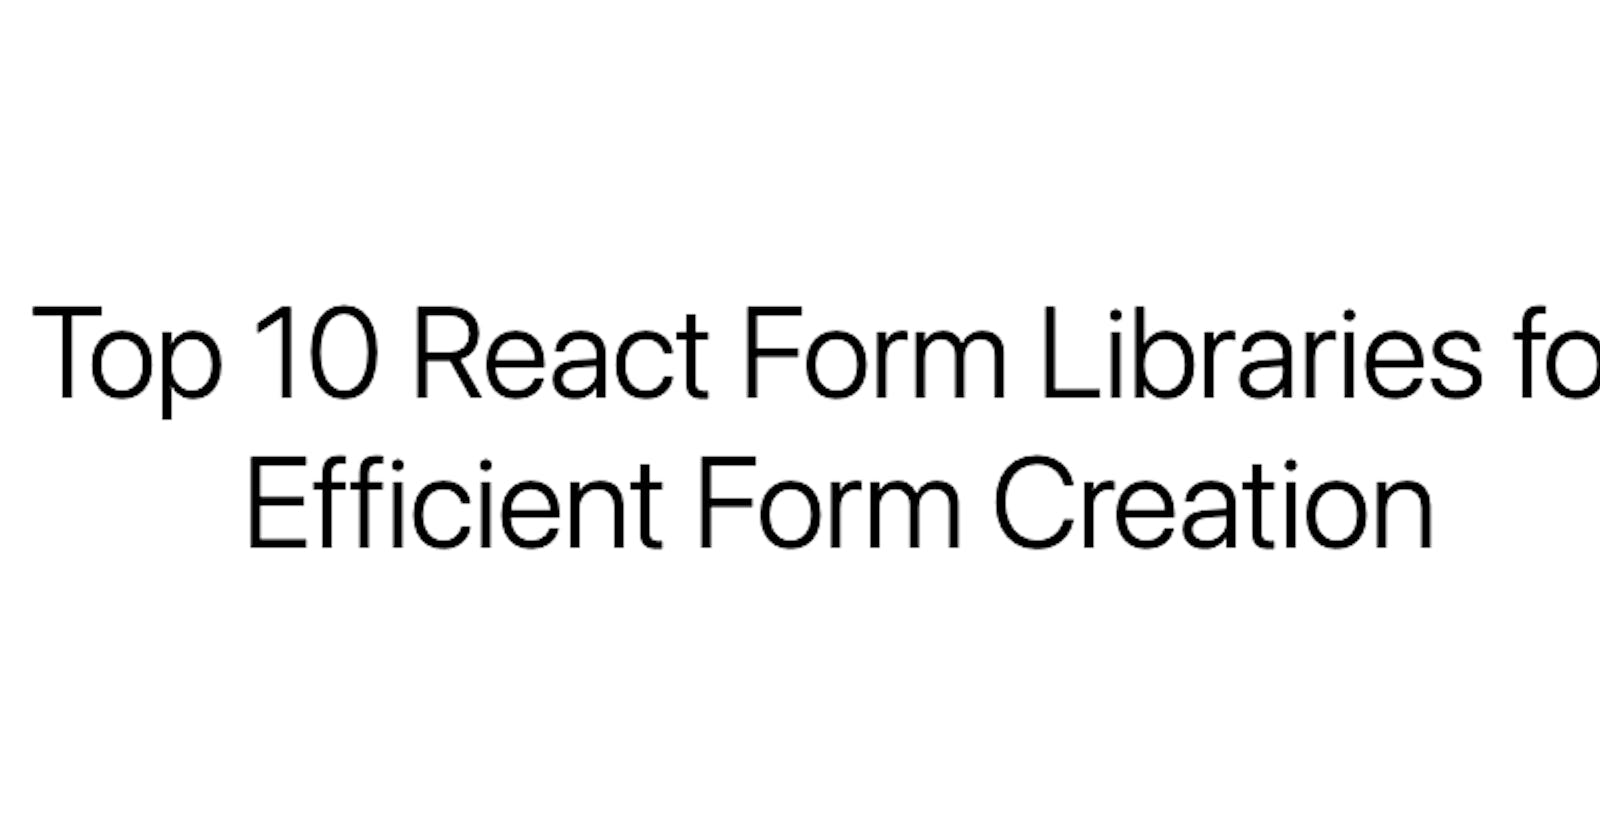 Top 10 React Form Libraries for Efficient Form Creation